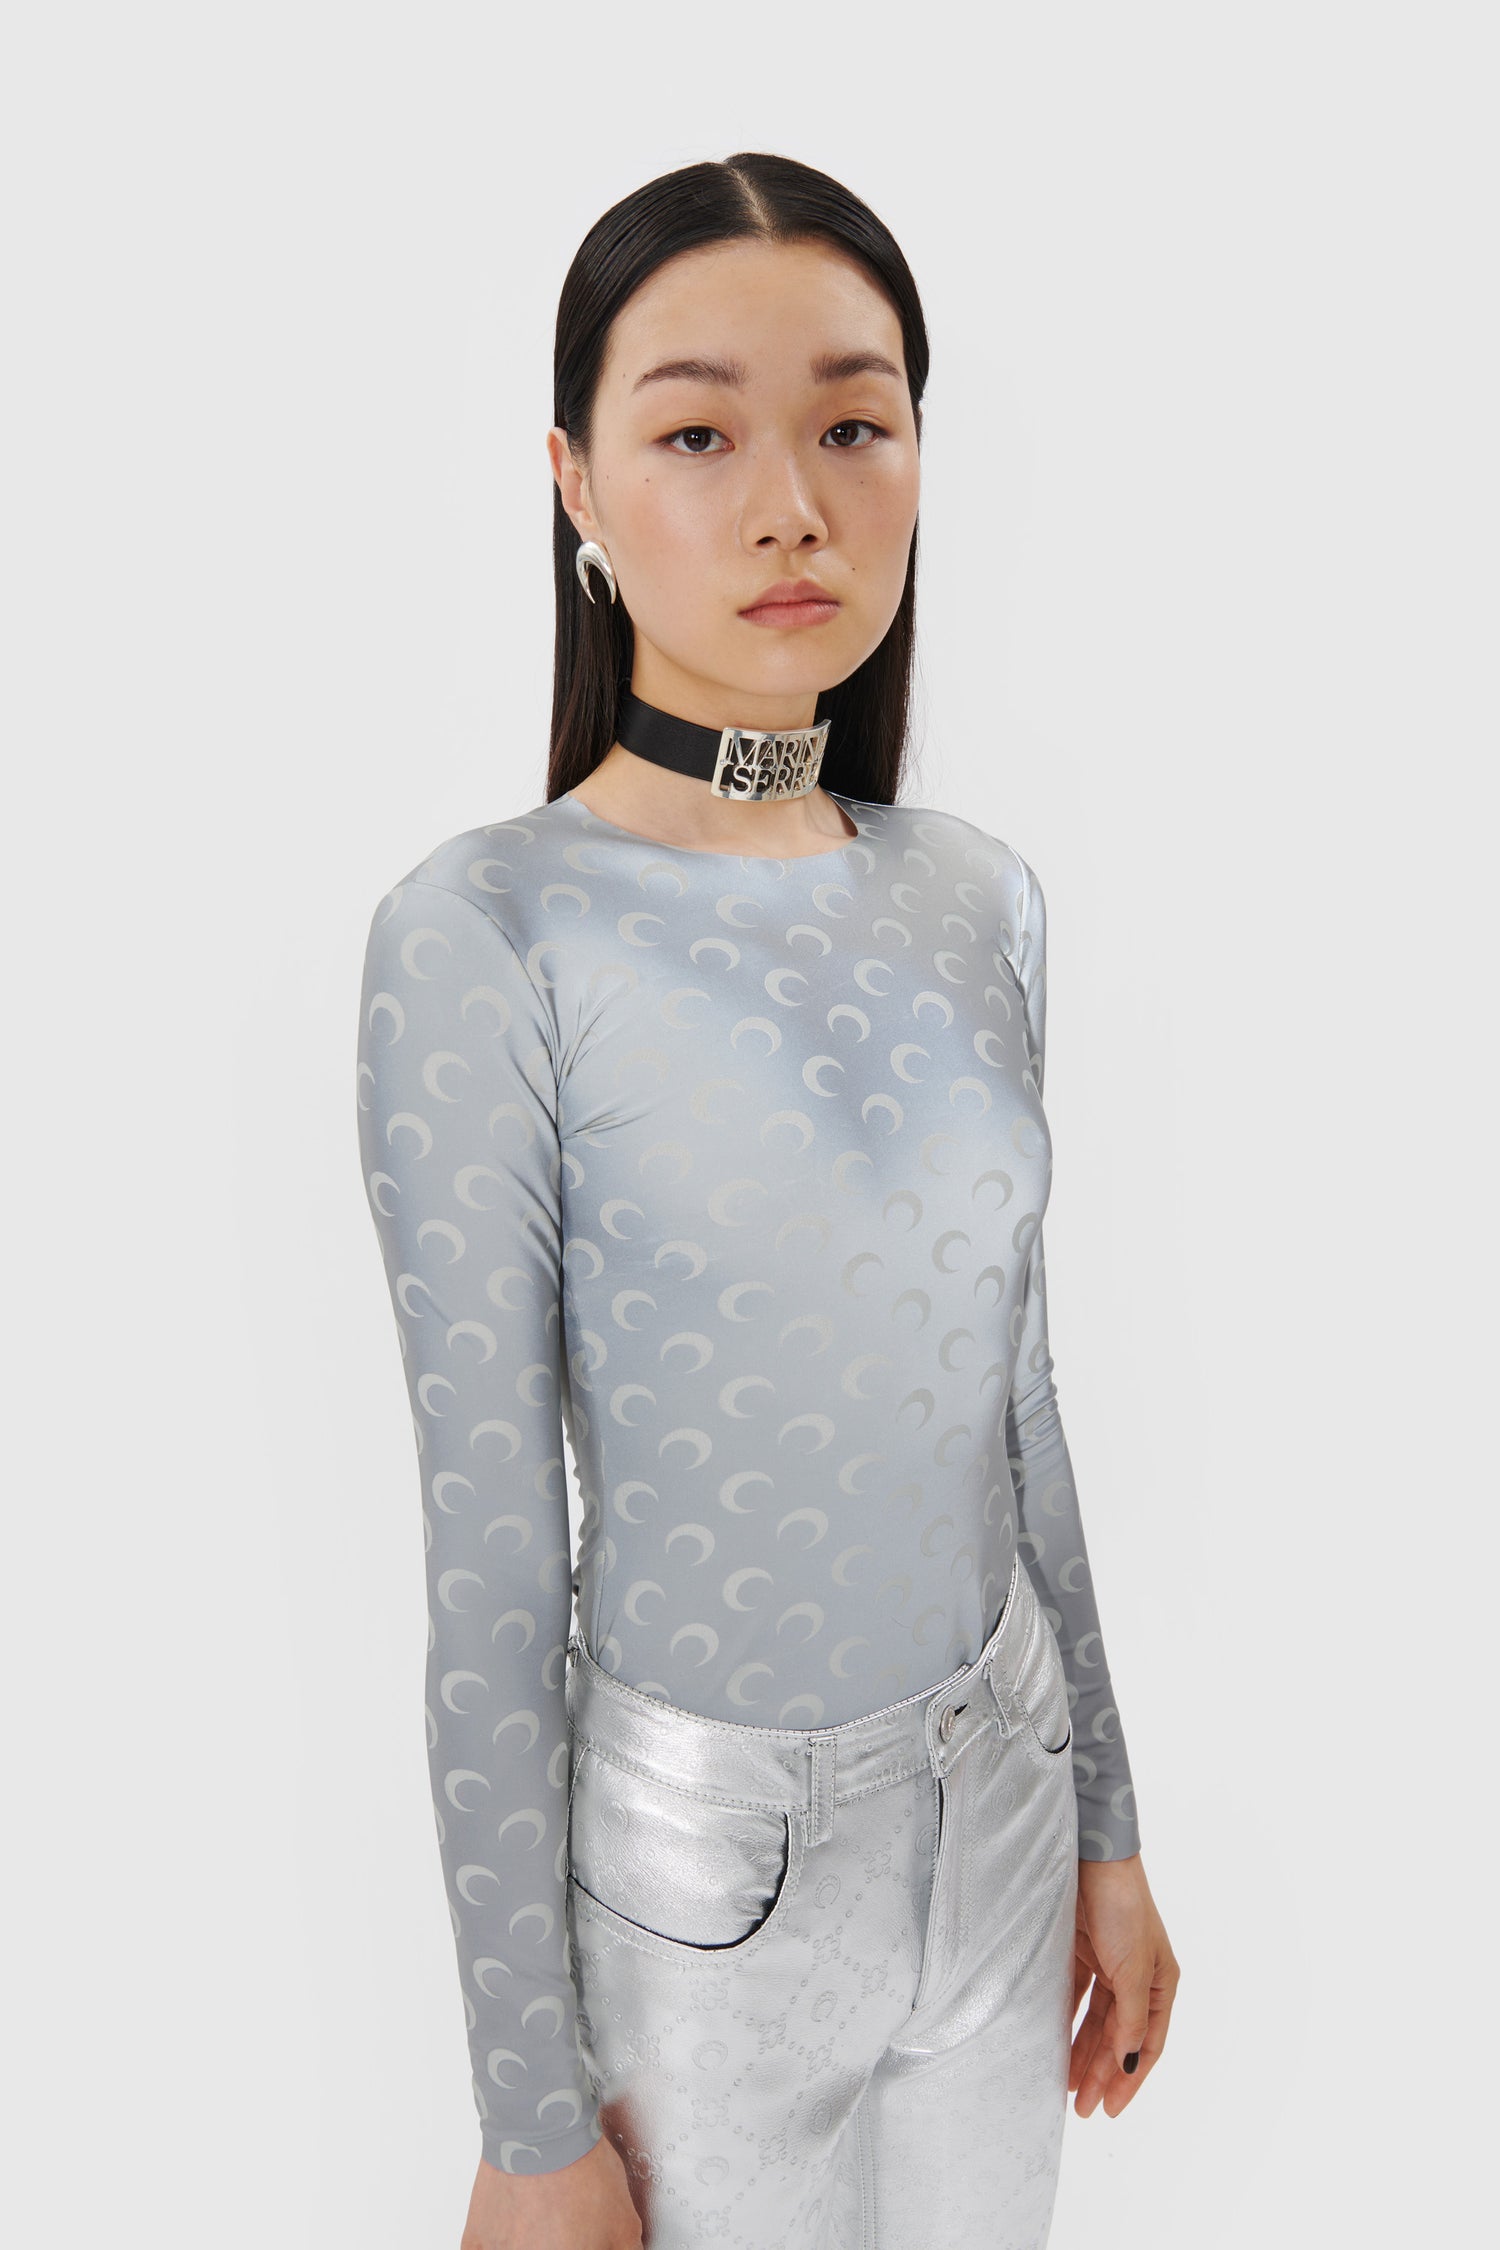 All Over Moon Reflective Long Sleeves Second Skin